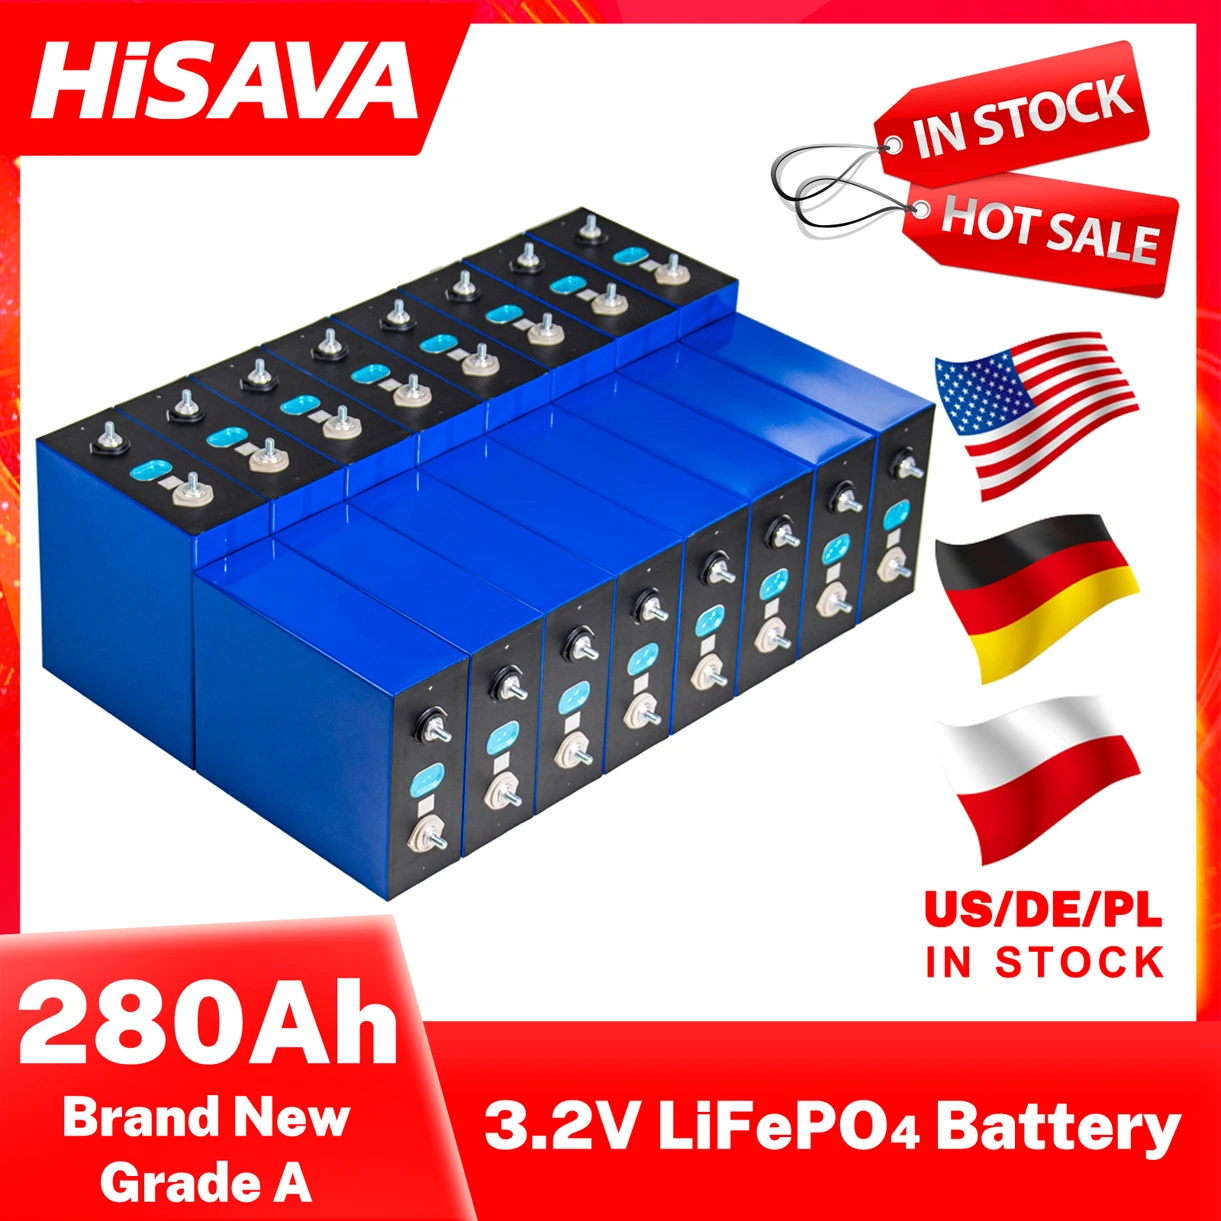 

3.2V 280AH LiFePO4 Rechargeable Lithium Iron Phosphate Battery Hot Sale Cell for RV PV Vans Campers EV Boats Yacht Golf Carts